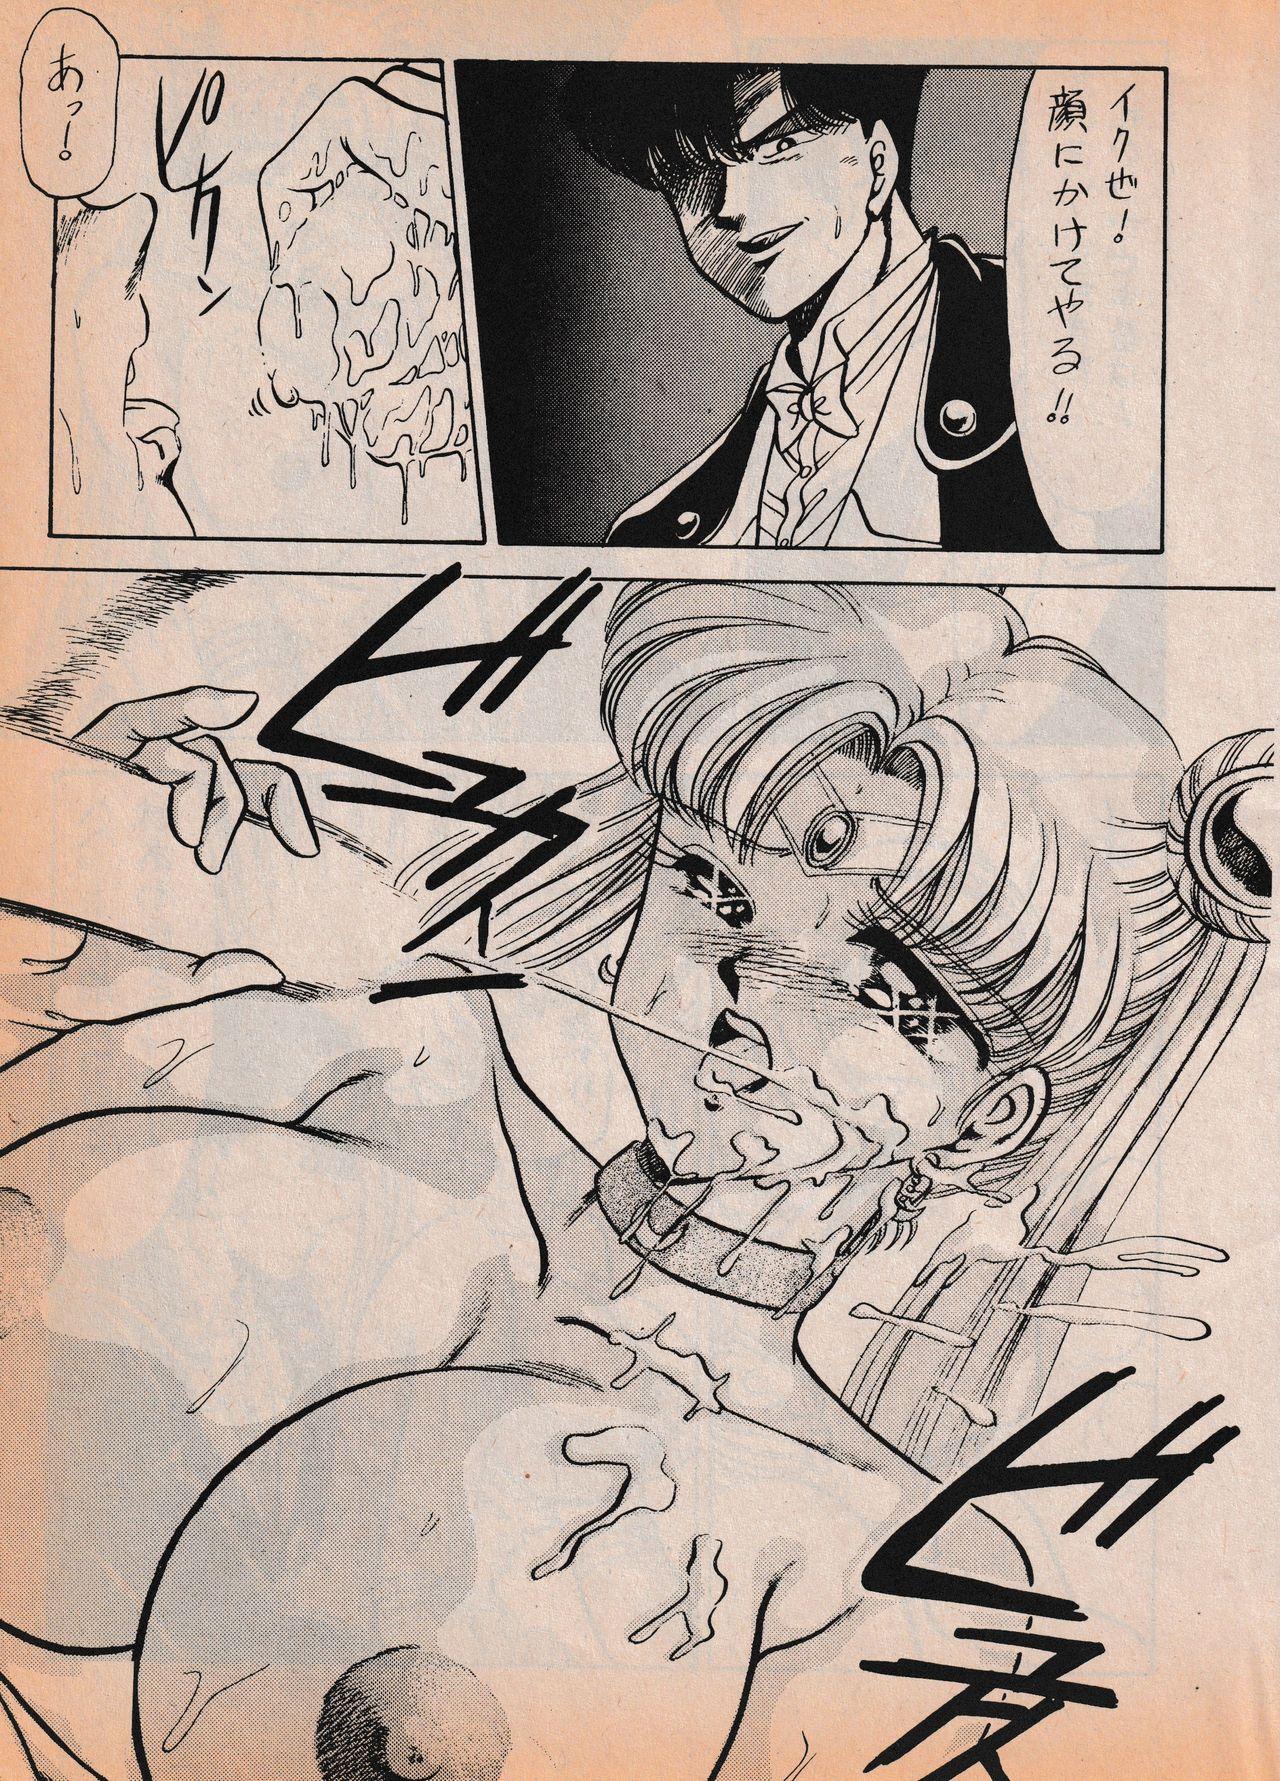 Cum On Pussy Sailor X vol. 7 - The Kama Sutra Of Pain - Sailor moon Tenchi muyo G gundam Jacking Off - Page 6